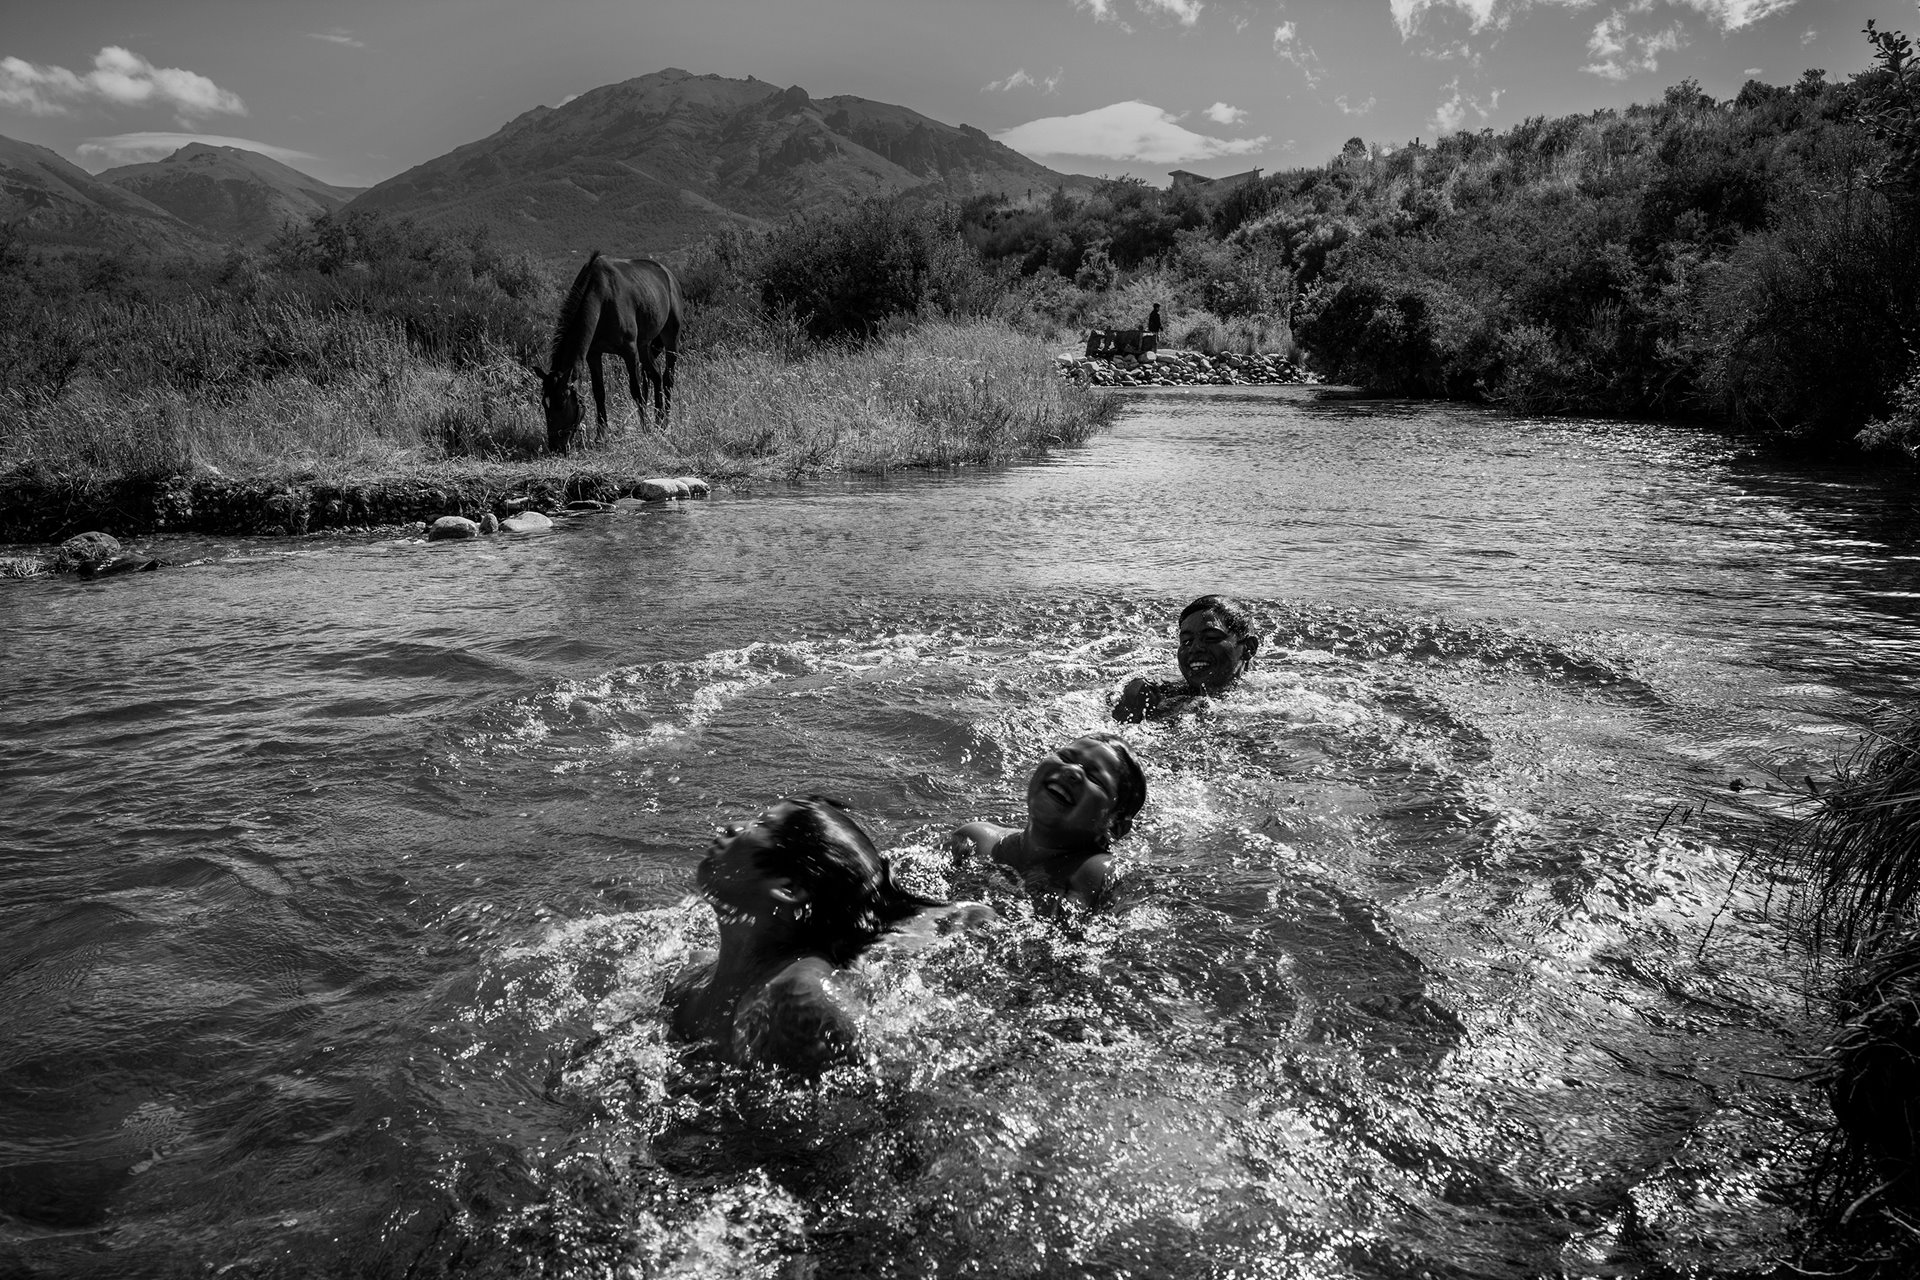 Cousins and friends of Rafael Nahuel swim in the Ñirihuau River, in Bariloche, Rio Negro, Argentina. Nahuel (22) was shot in the back during a raid by government forces on Indigenous activists in November 2017. He was supporting Mapuche groups who had occupied ancestral territories in Patagonia. In 2023 five members of an elite police squad were convicted of his murder.